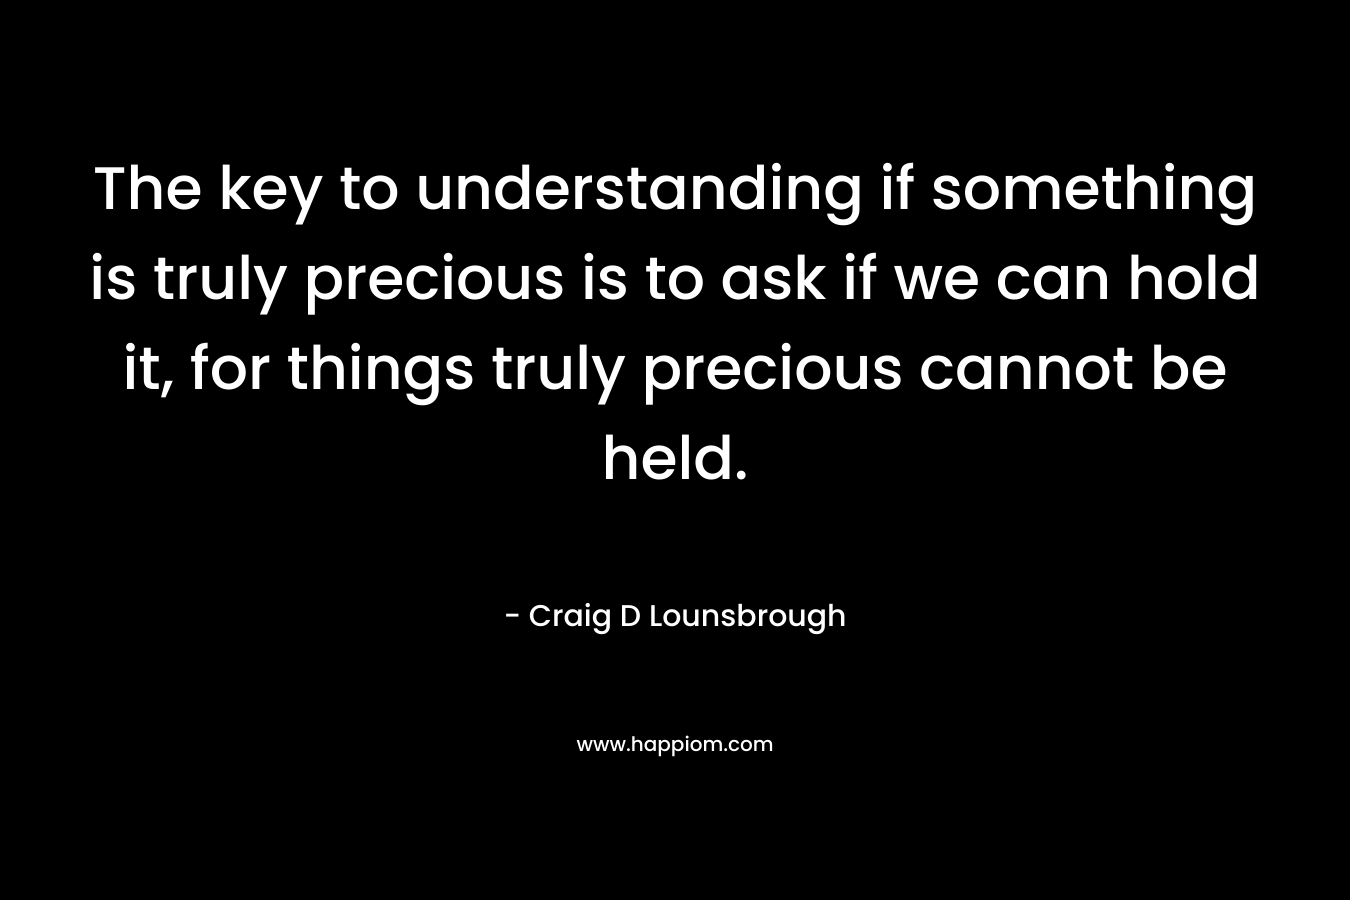 The key to understanding if something is truly precious is to ask if we can hold it, for things truly precious cannot be held.